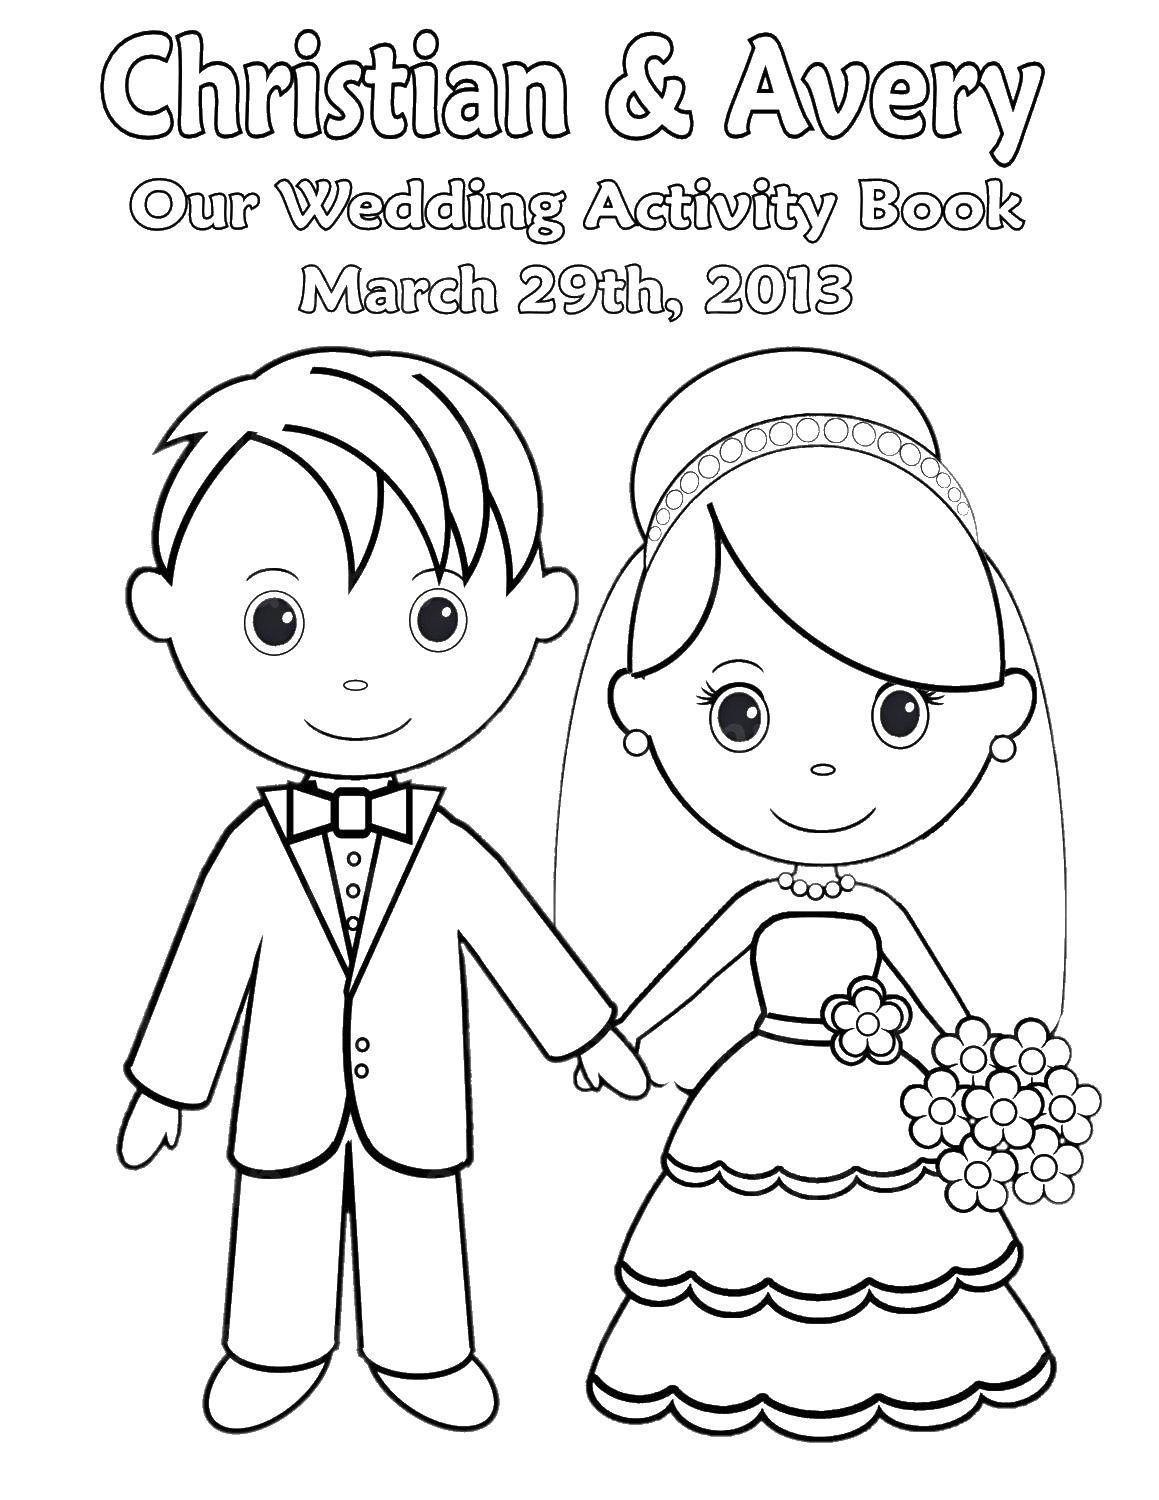 Coloring Christian and Avery. Category Wedding. Tags:  Wedding, dress, bride, groom.